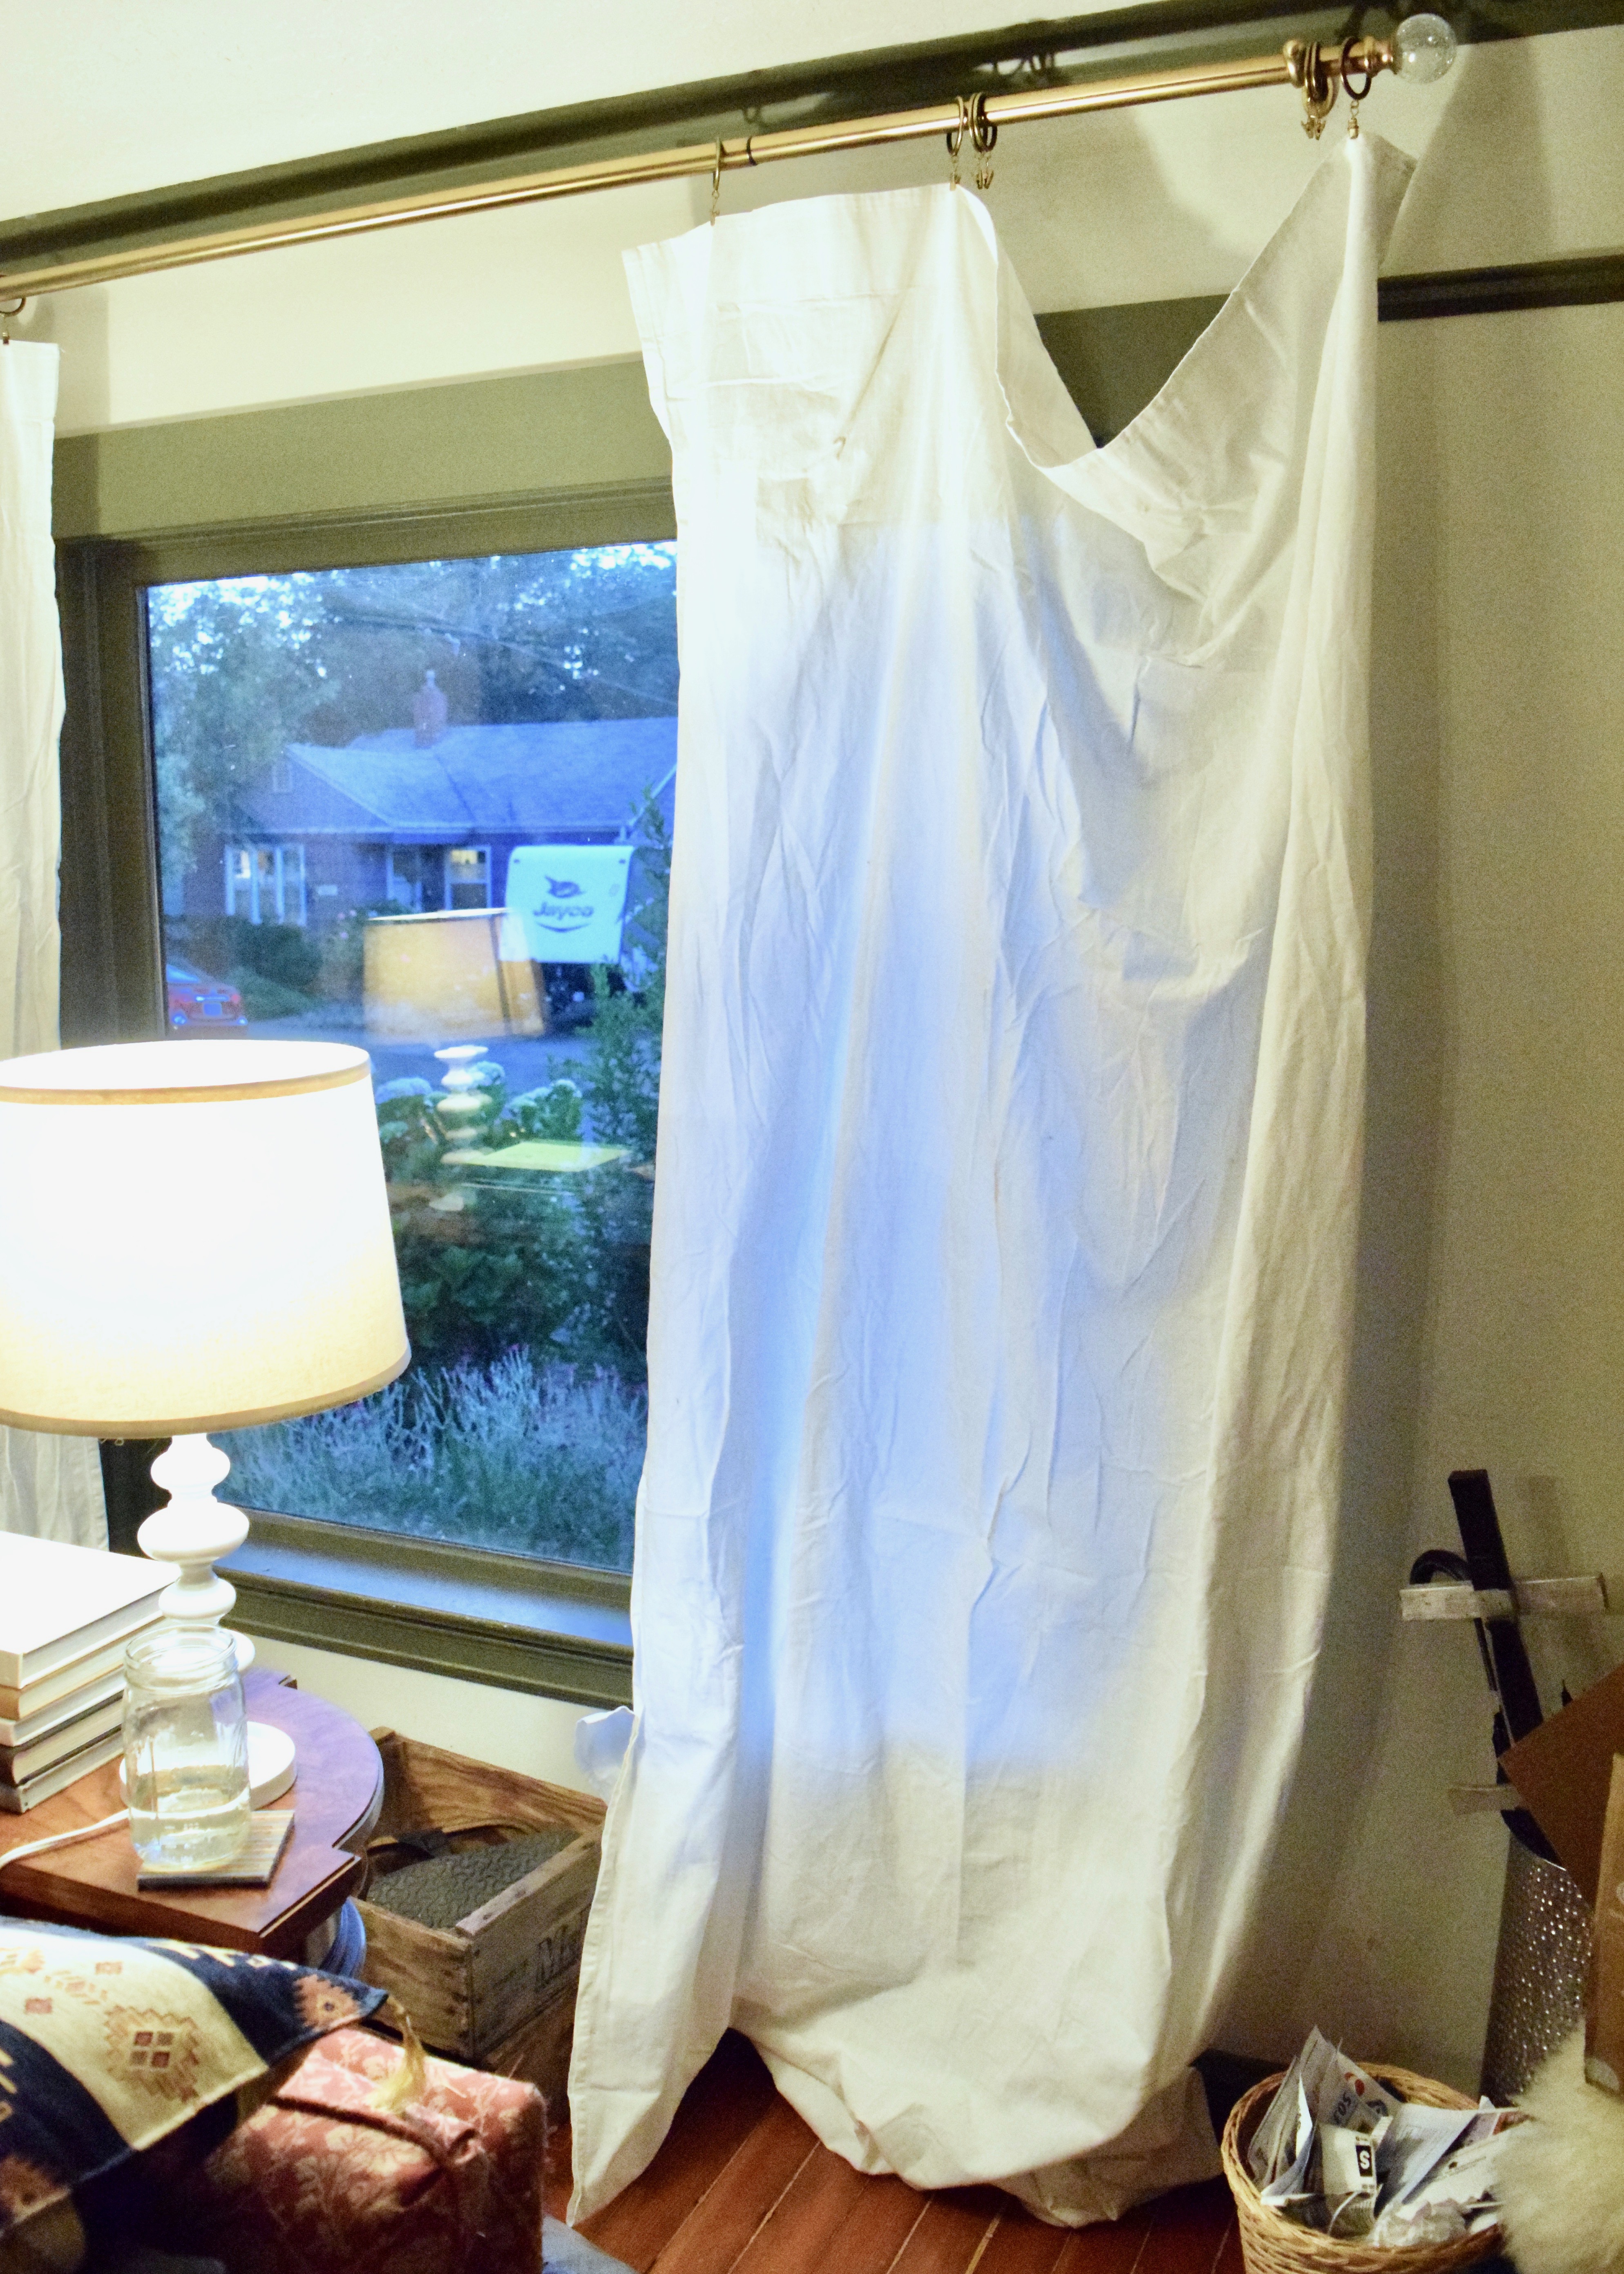 How to Hem Curtains and Why It's Better Than Iron-On Tape – Land of Laurel